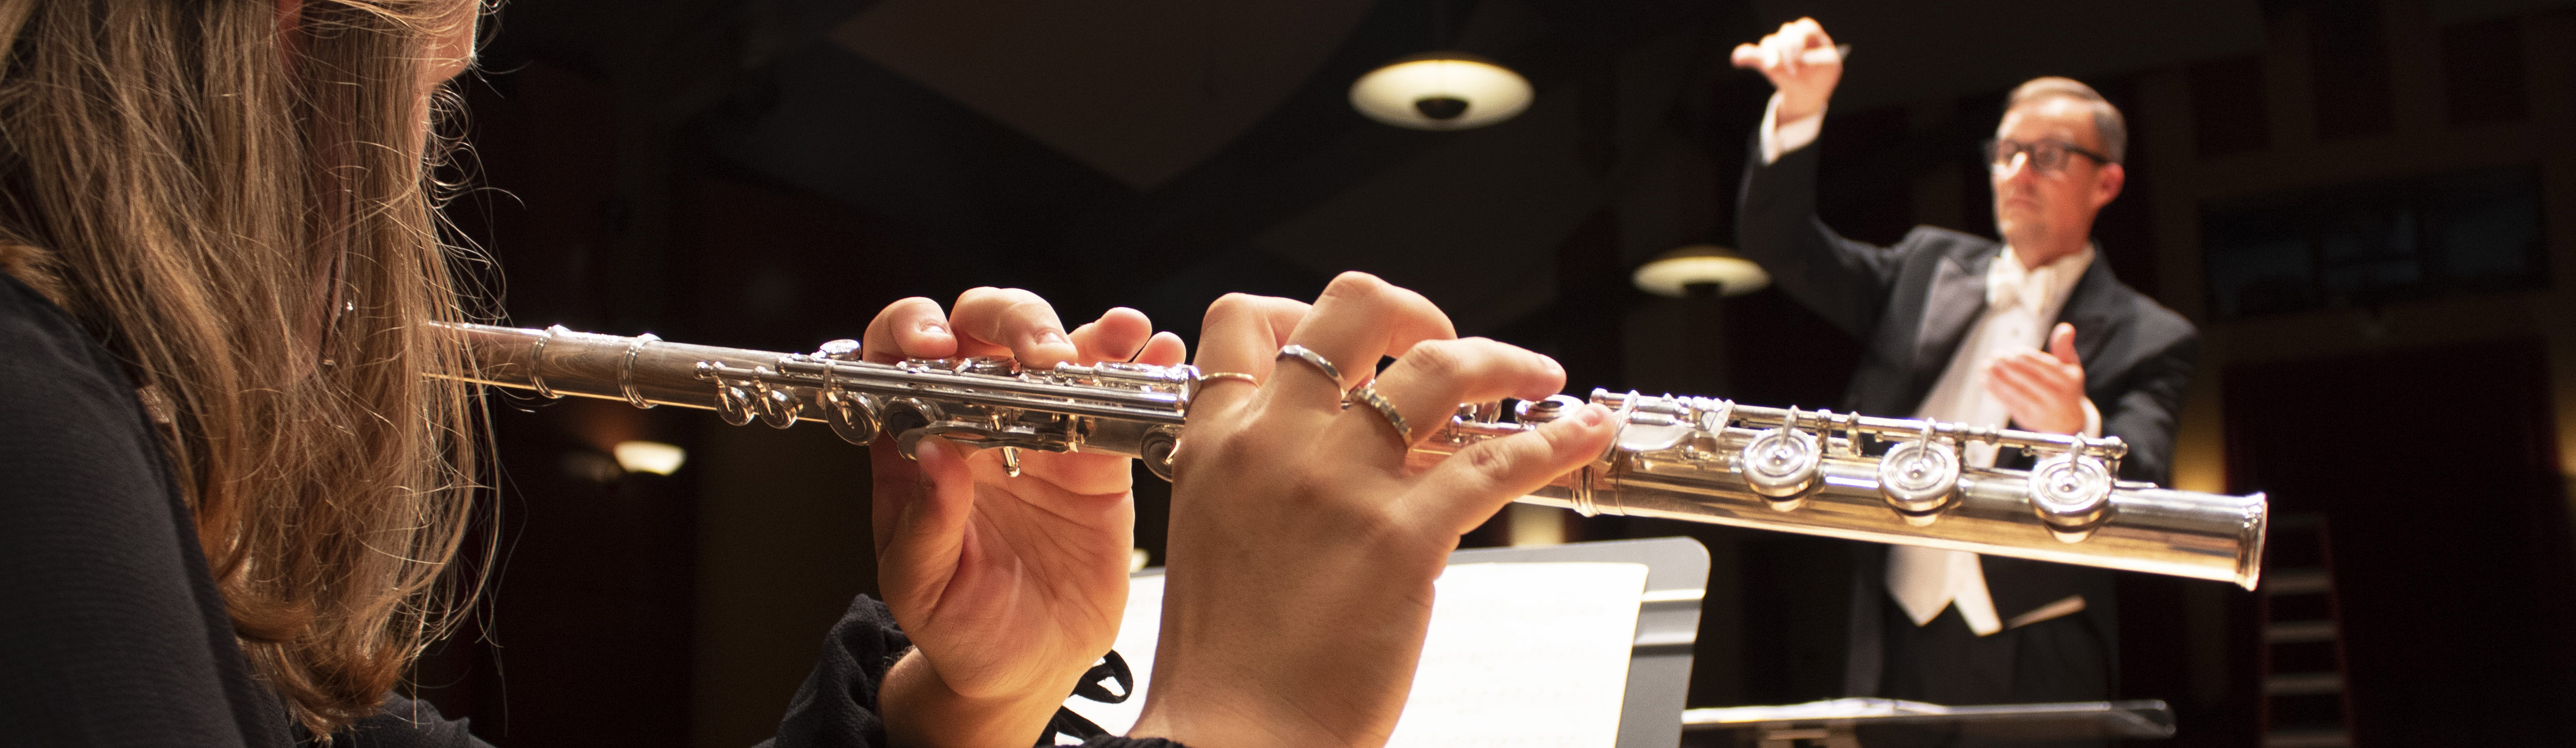 Close up of a student's hands as they play the C-flute with a conductor in the background.